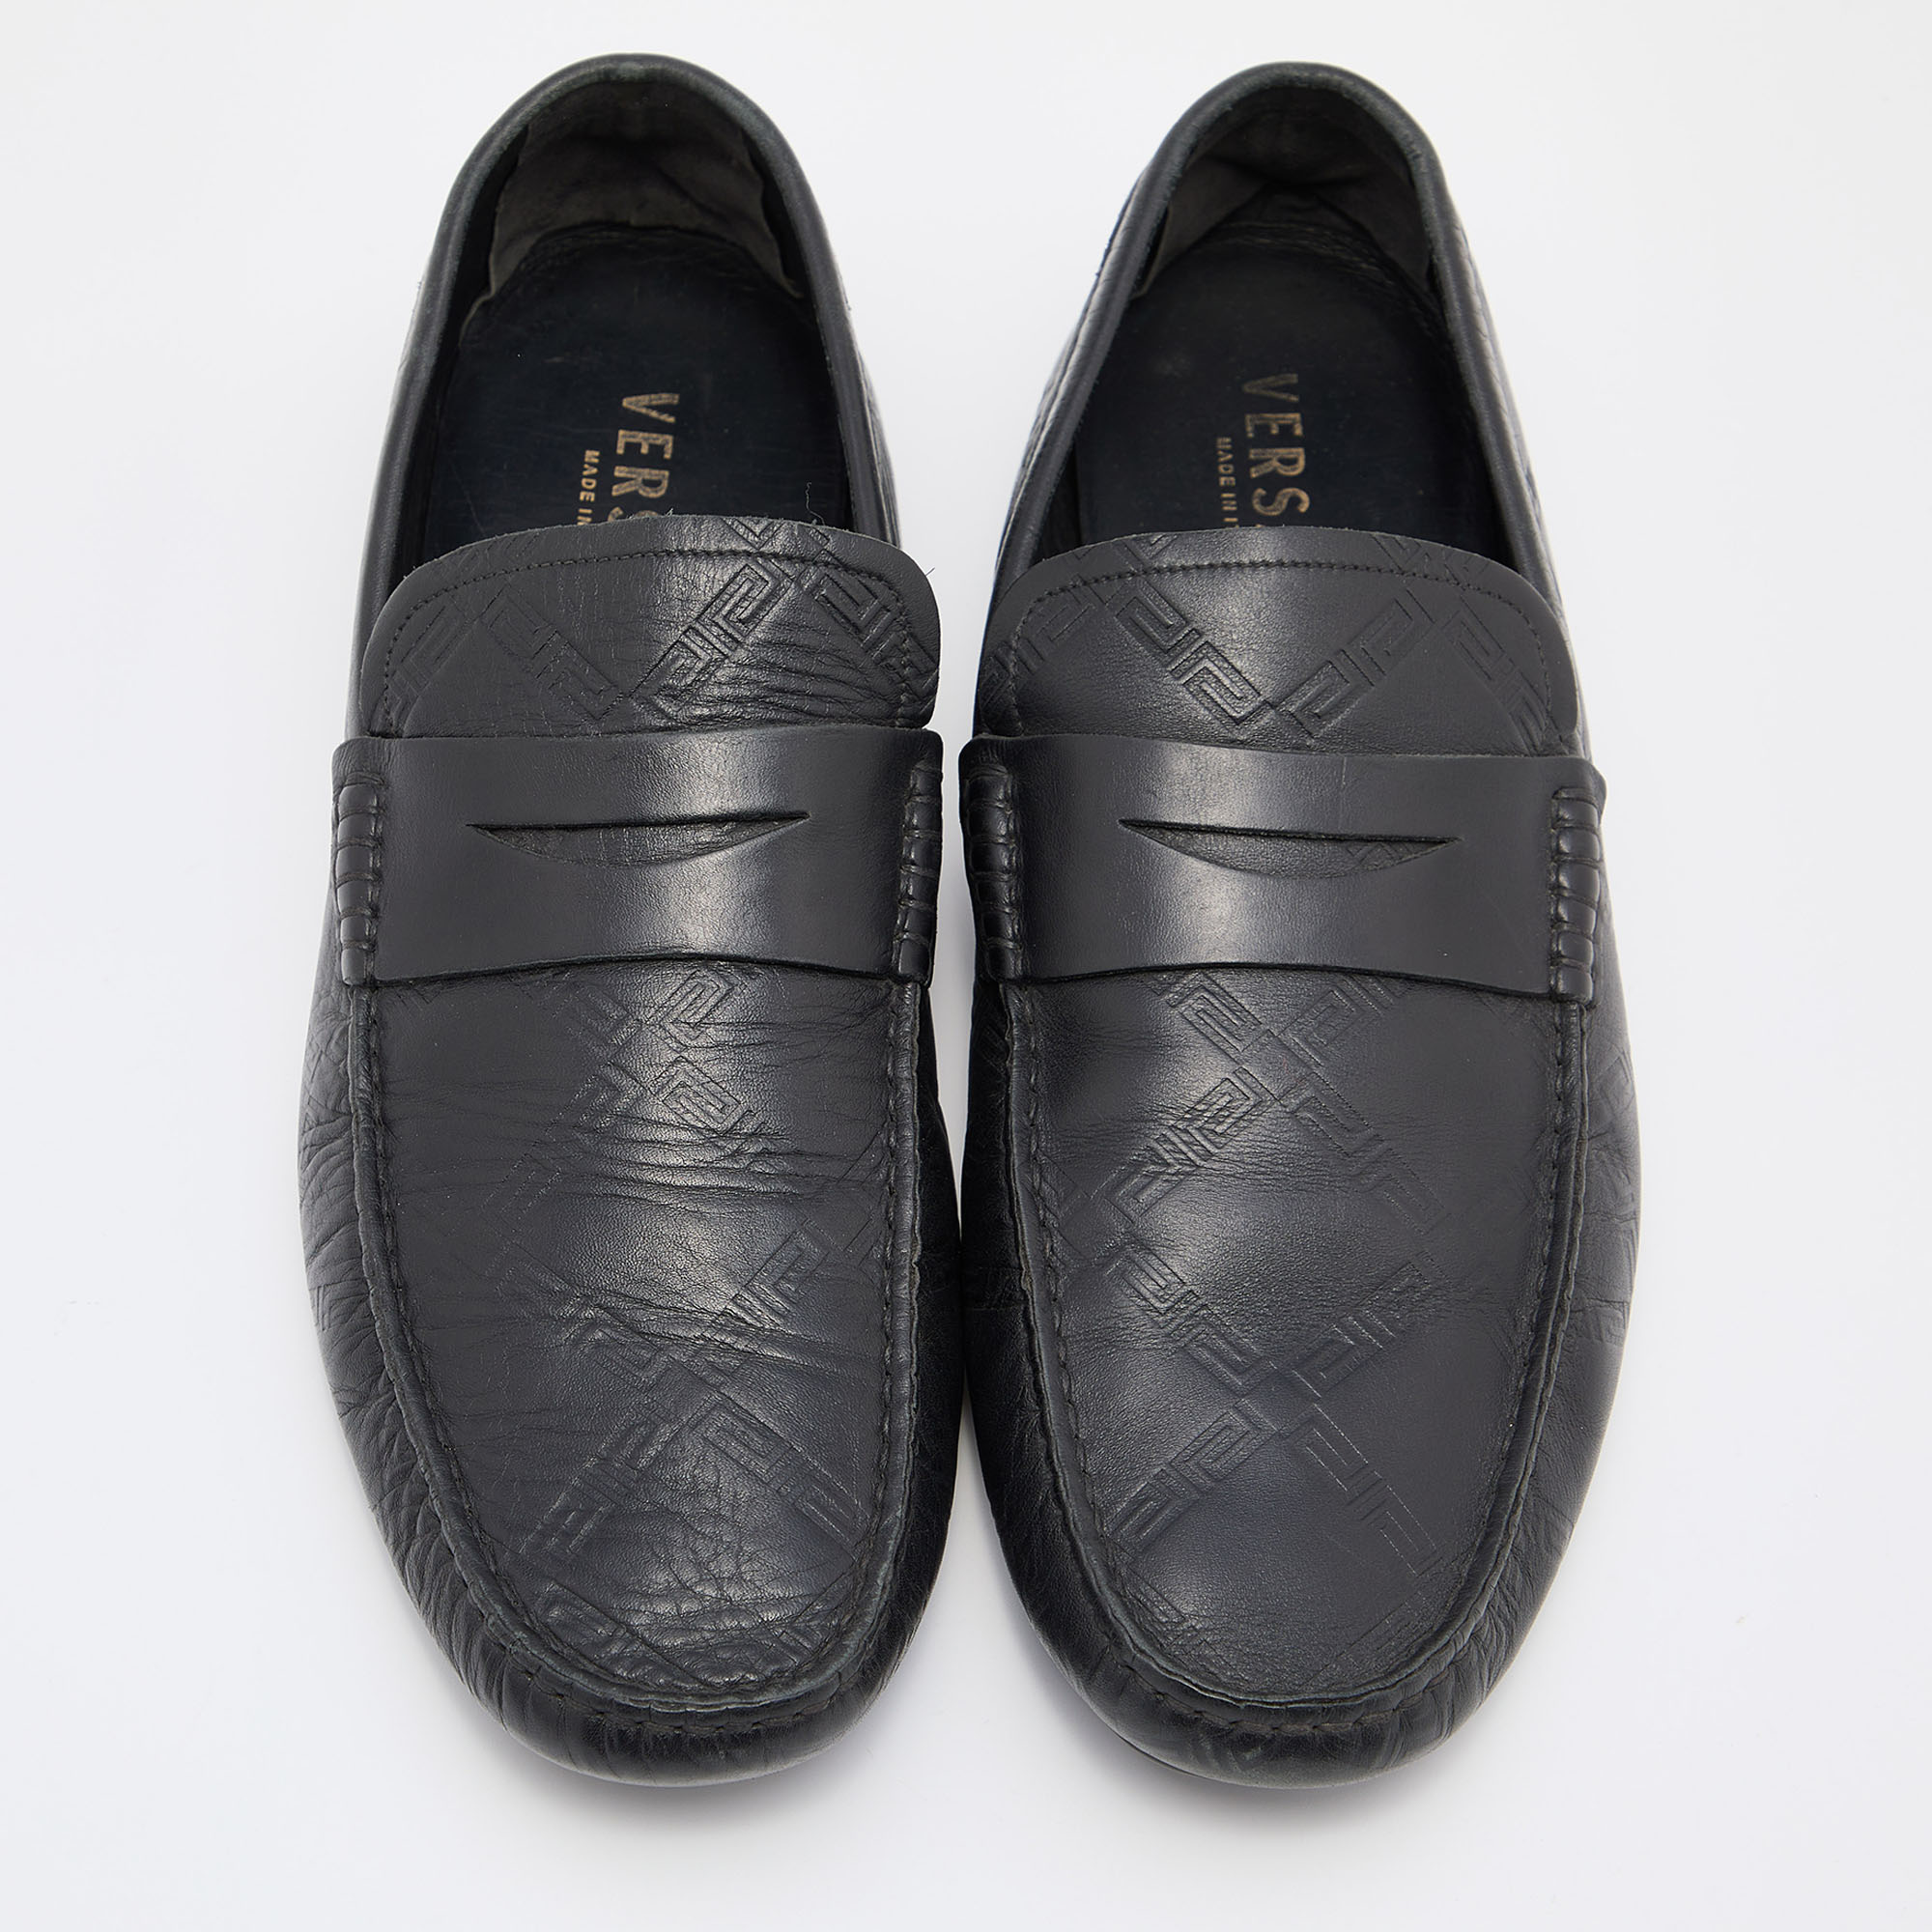 Versace Black Leather Penny Slip On Loafers Size 43